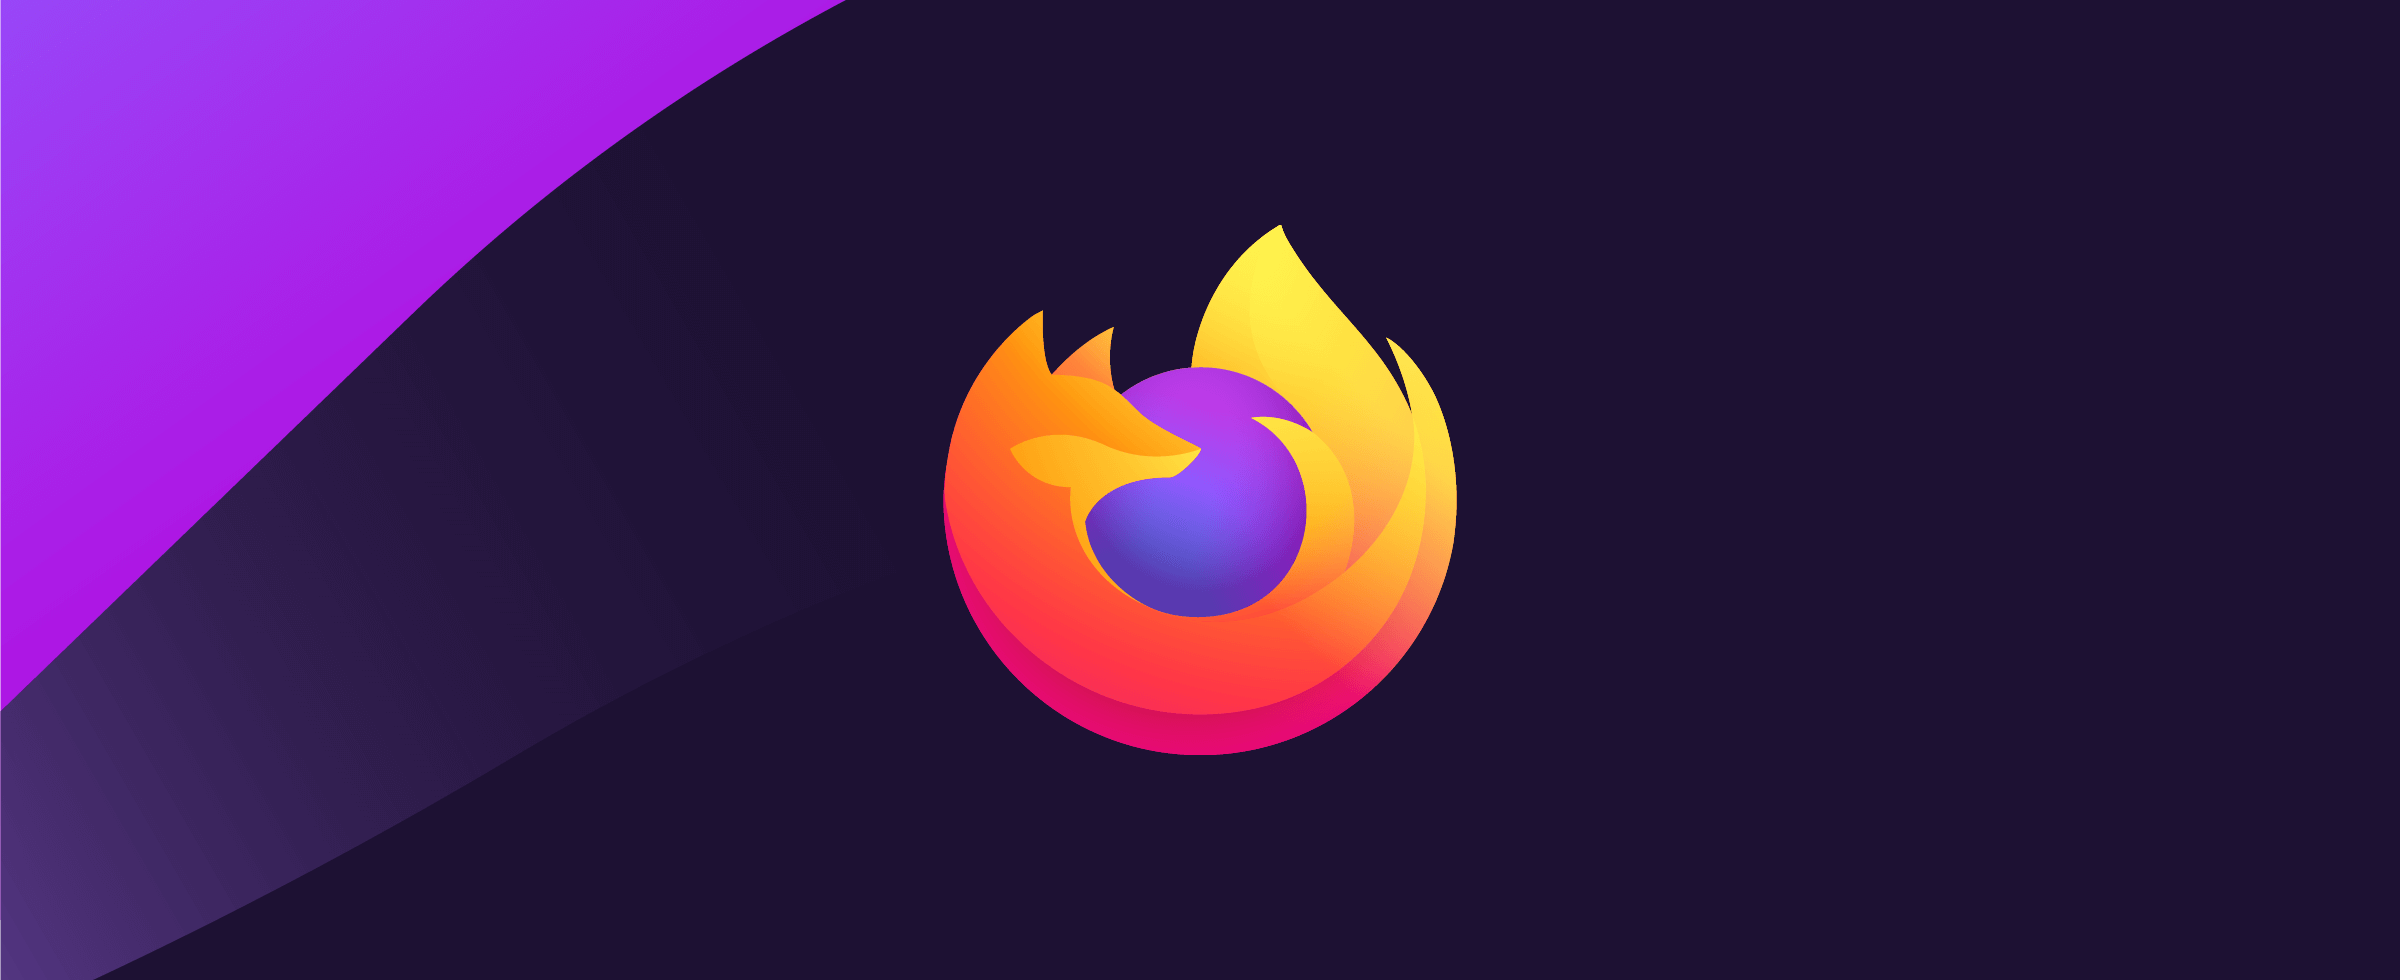 Do you ever use the Firefox browser?